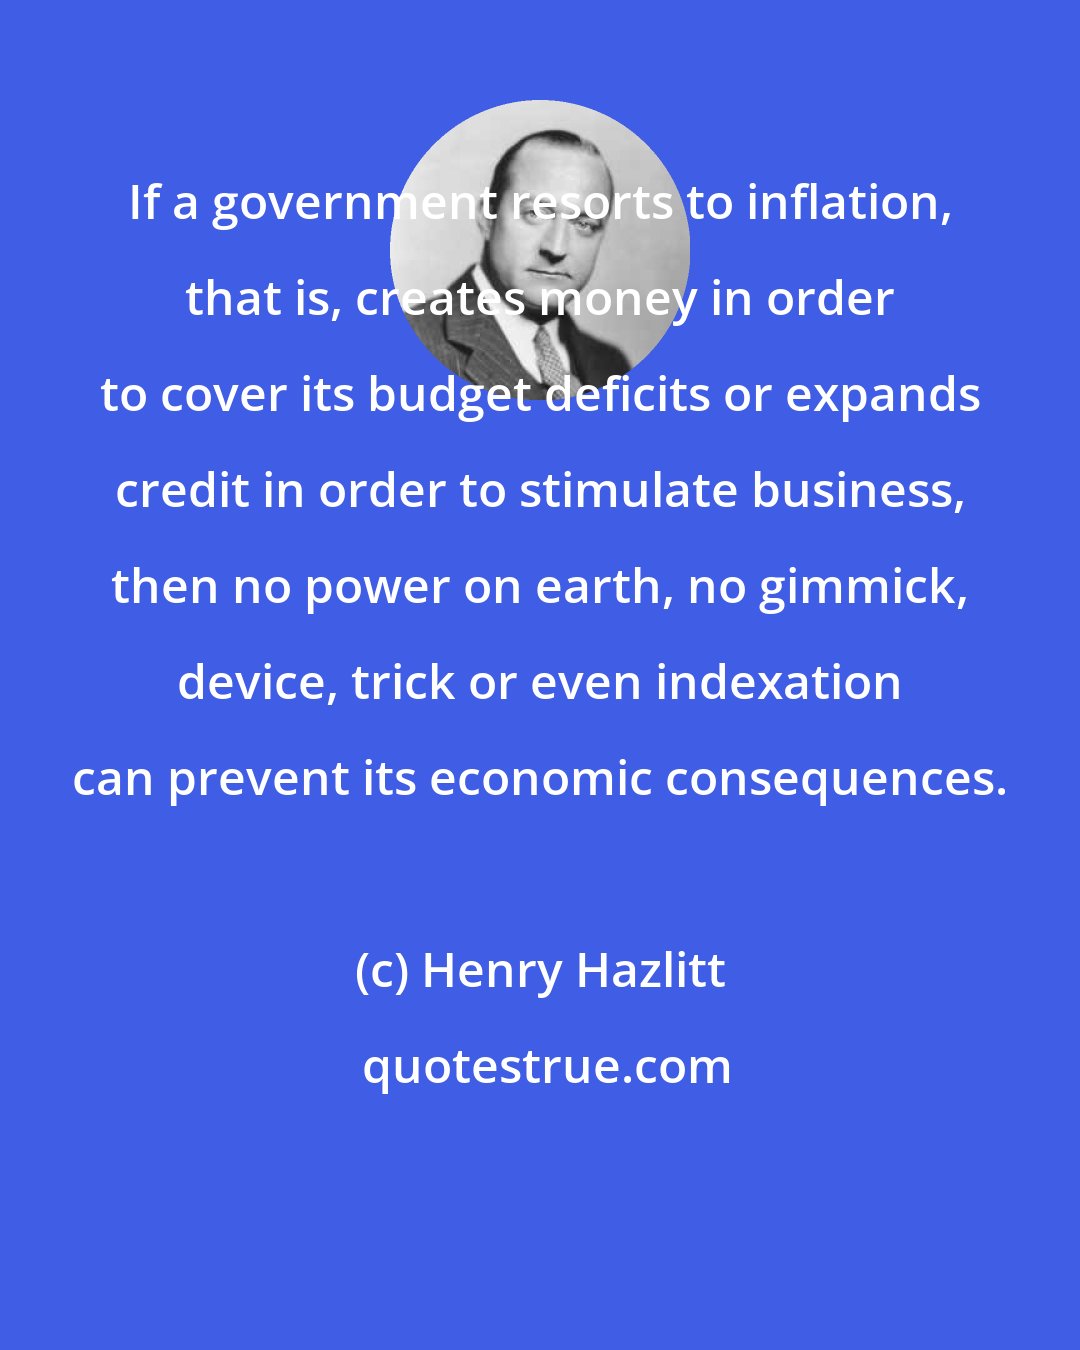 Henry Hazlitt: If a government resorts to inflation, that is, creates money in order to cover its budget deficits or expands credit in order to stimulate business, then no power on earth, no gimmick, device, trick or even indexation can prevent its economic consequences.